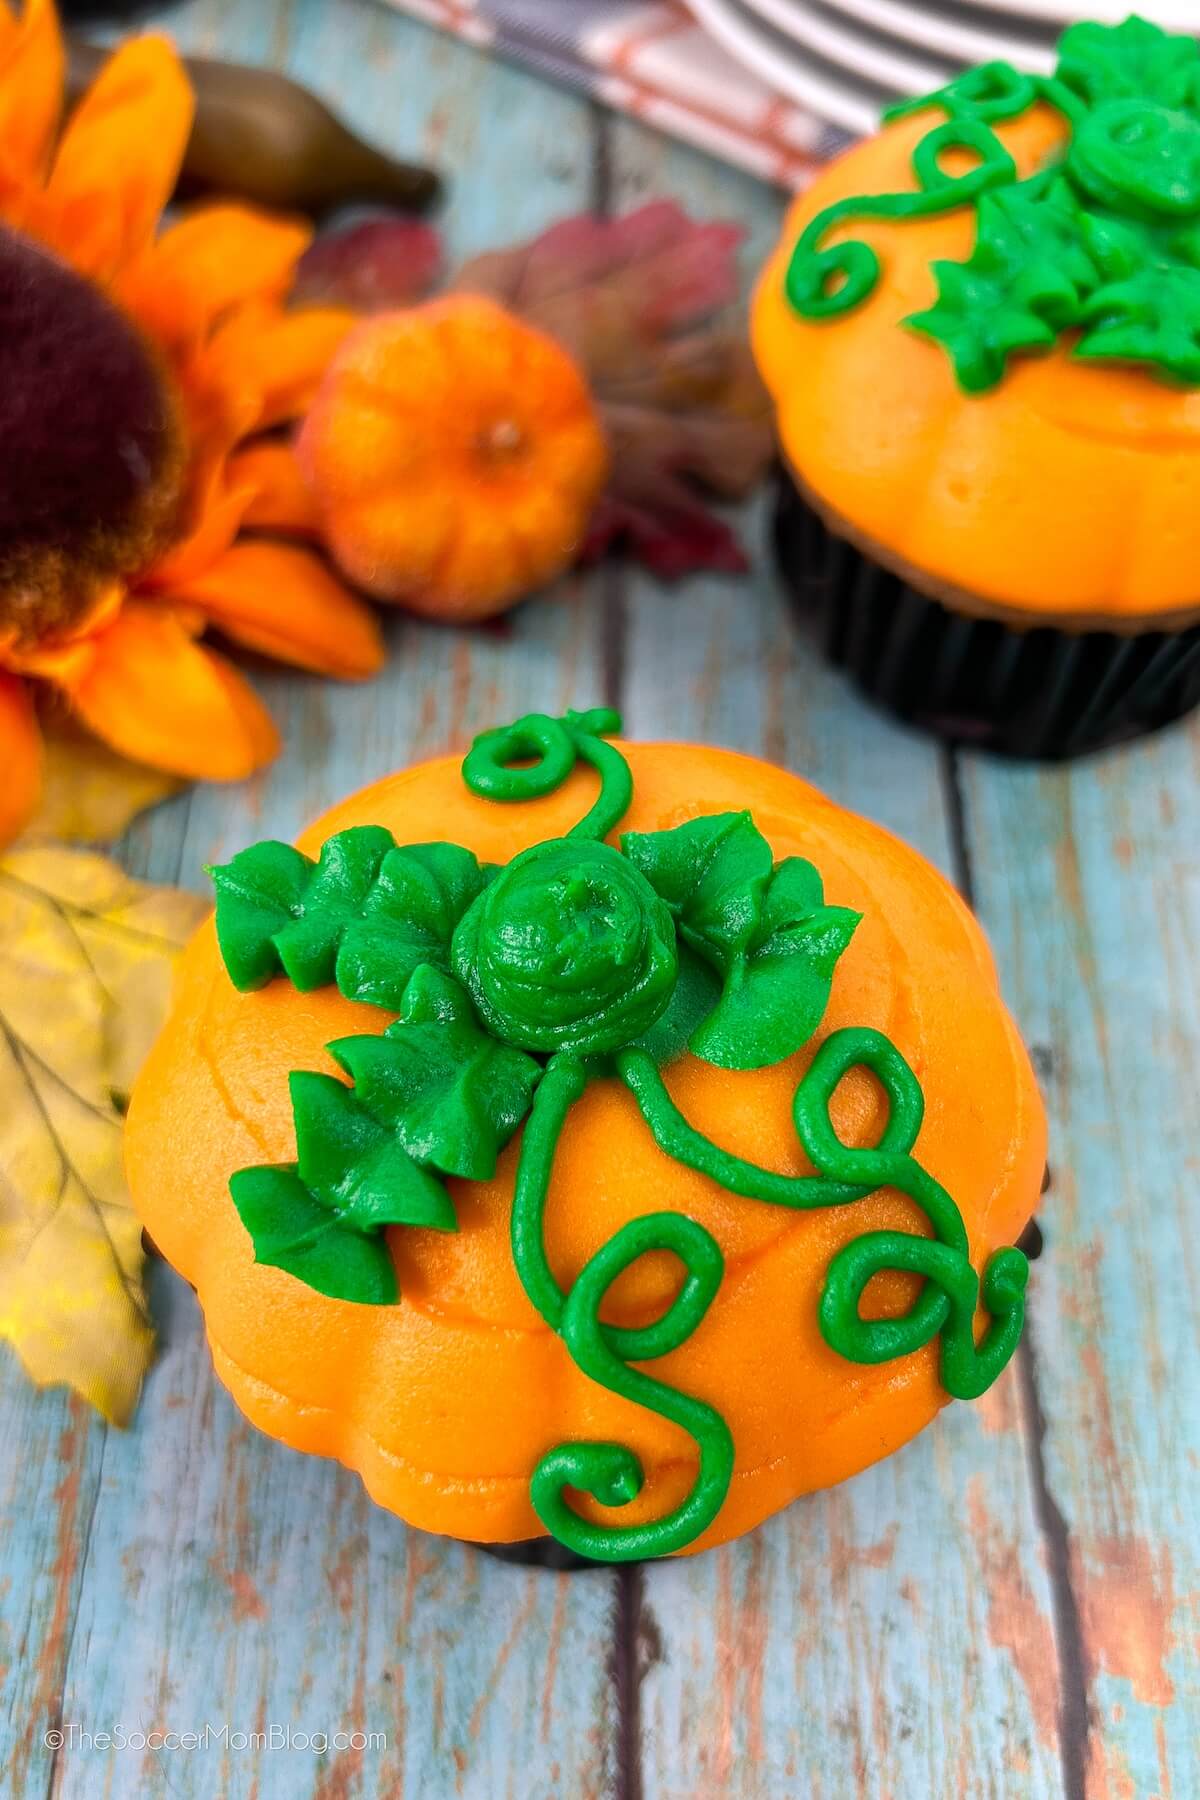 top down view of a cupcake with frosting on top that looks like an orange pumpkin with green leaves.